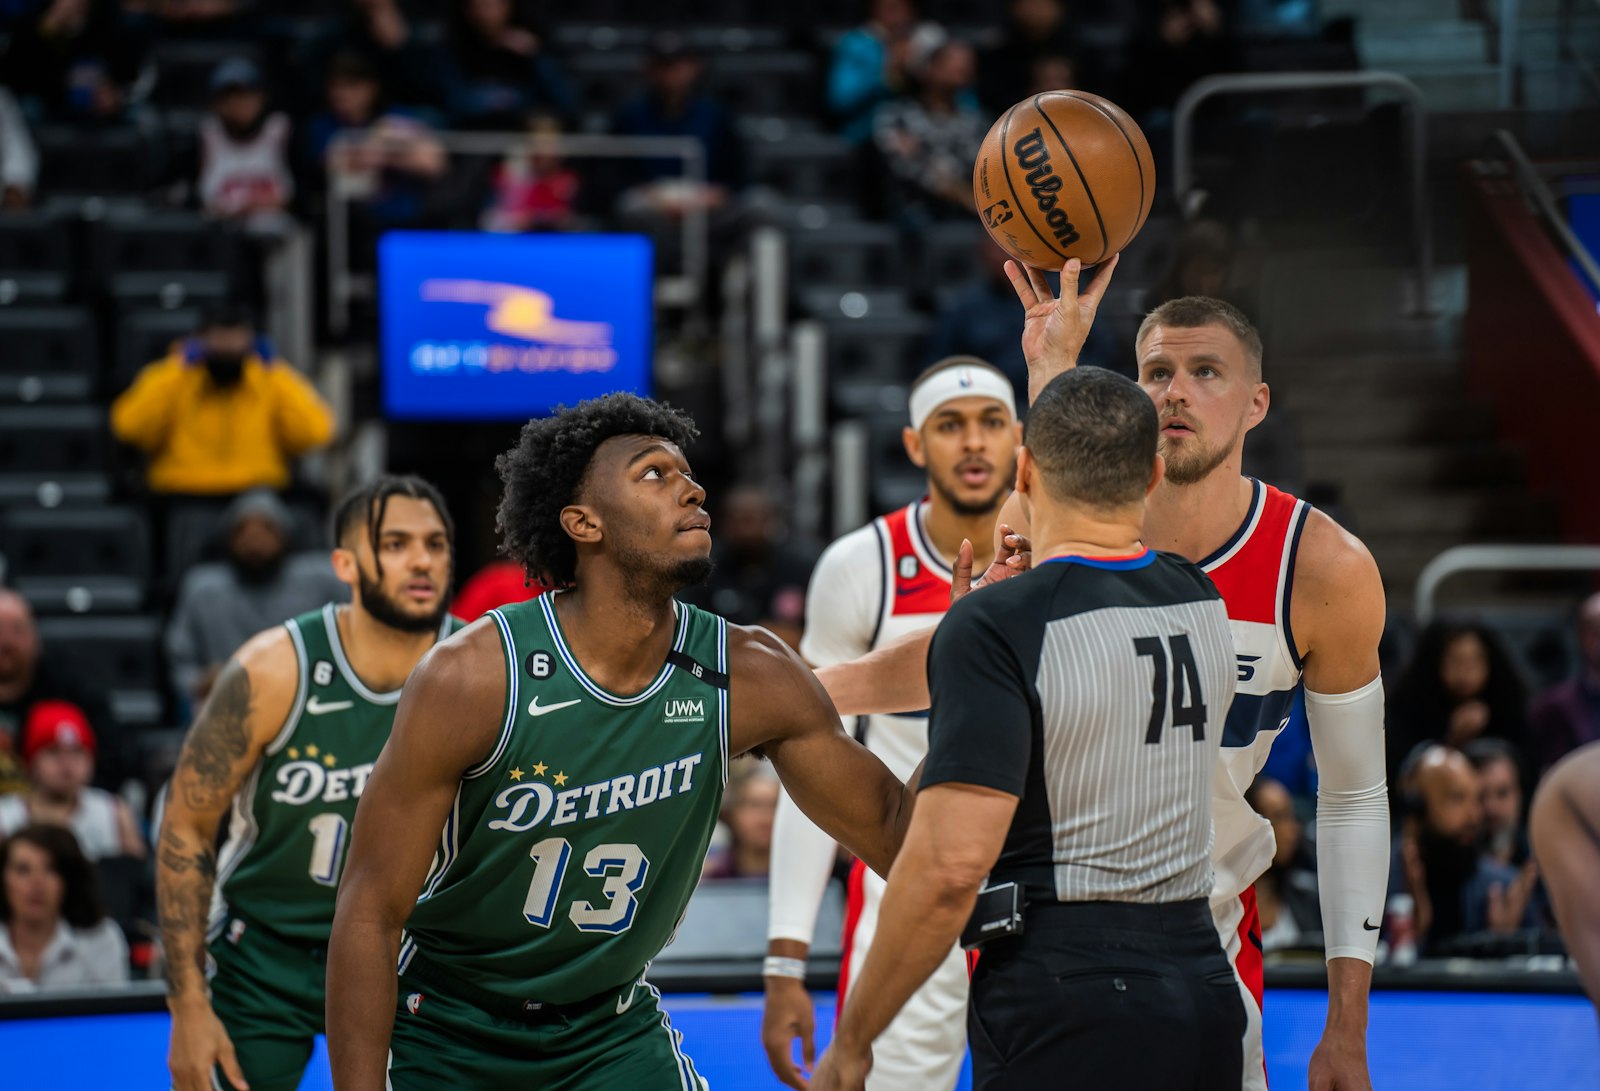 The Detroit Pistons’ James Wiseman prepares to tip off against the Washington Wizards’ Kristaps Porzingis during a March 7 game at Little Caesars Arena in Detroit. The Wizards defeated the Pistons, 119-117, on a night when the Pistons were wearing their green City Edition “313” jerseys in honor of Ceciliaville.